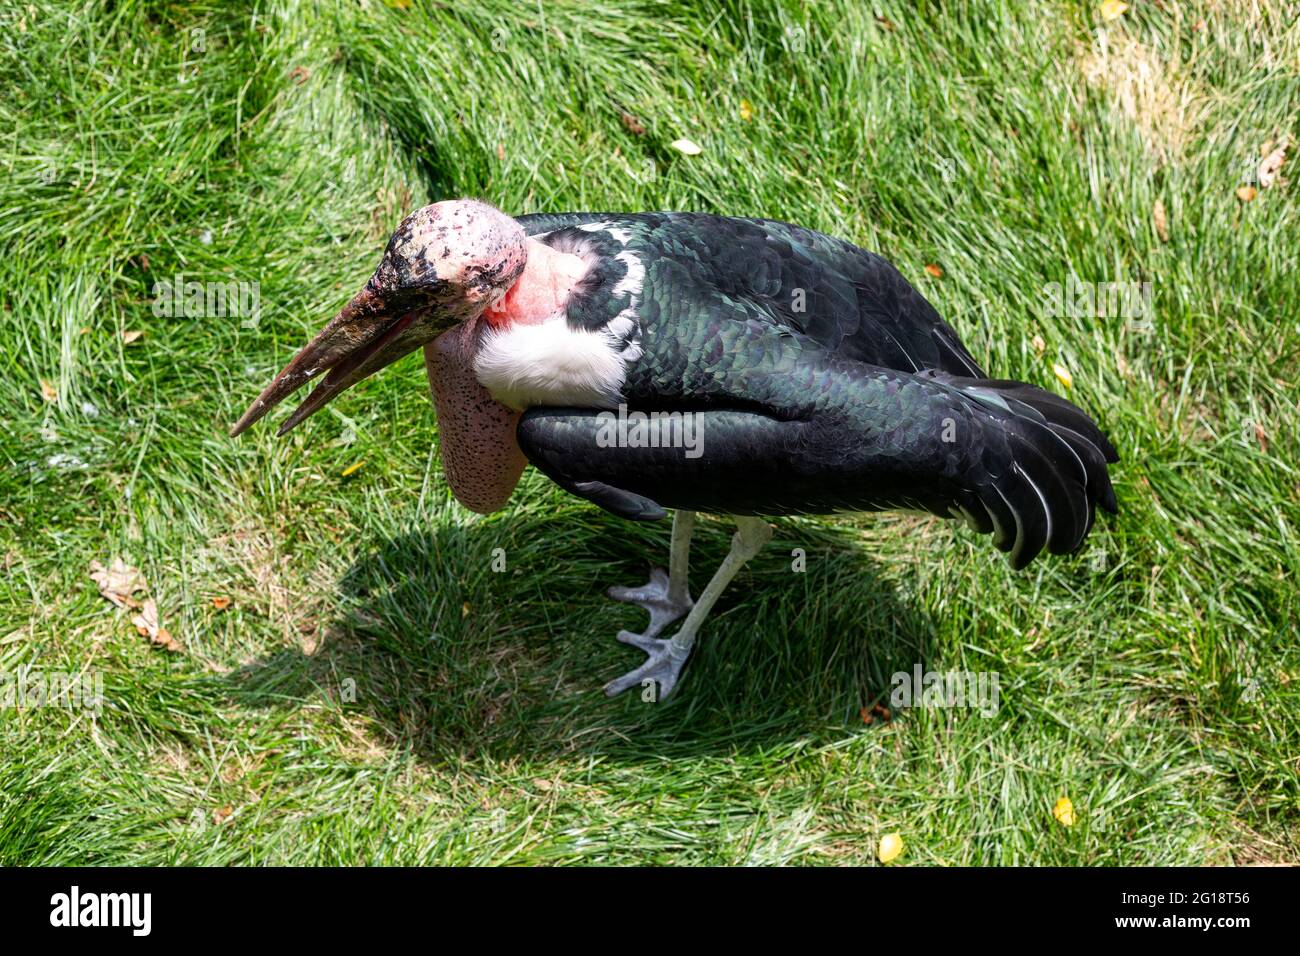 This Marabou Stork lives at the zoo. Stock Photo